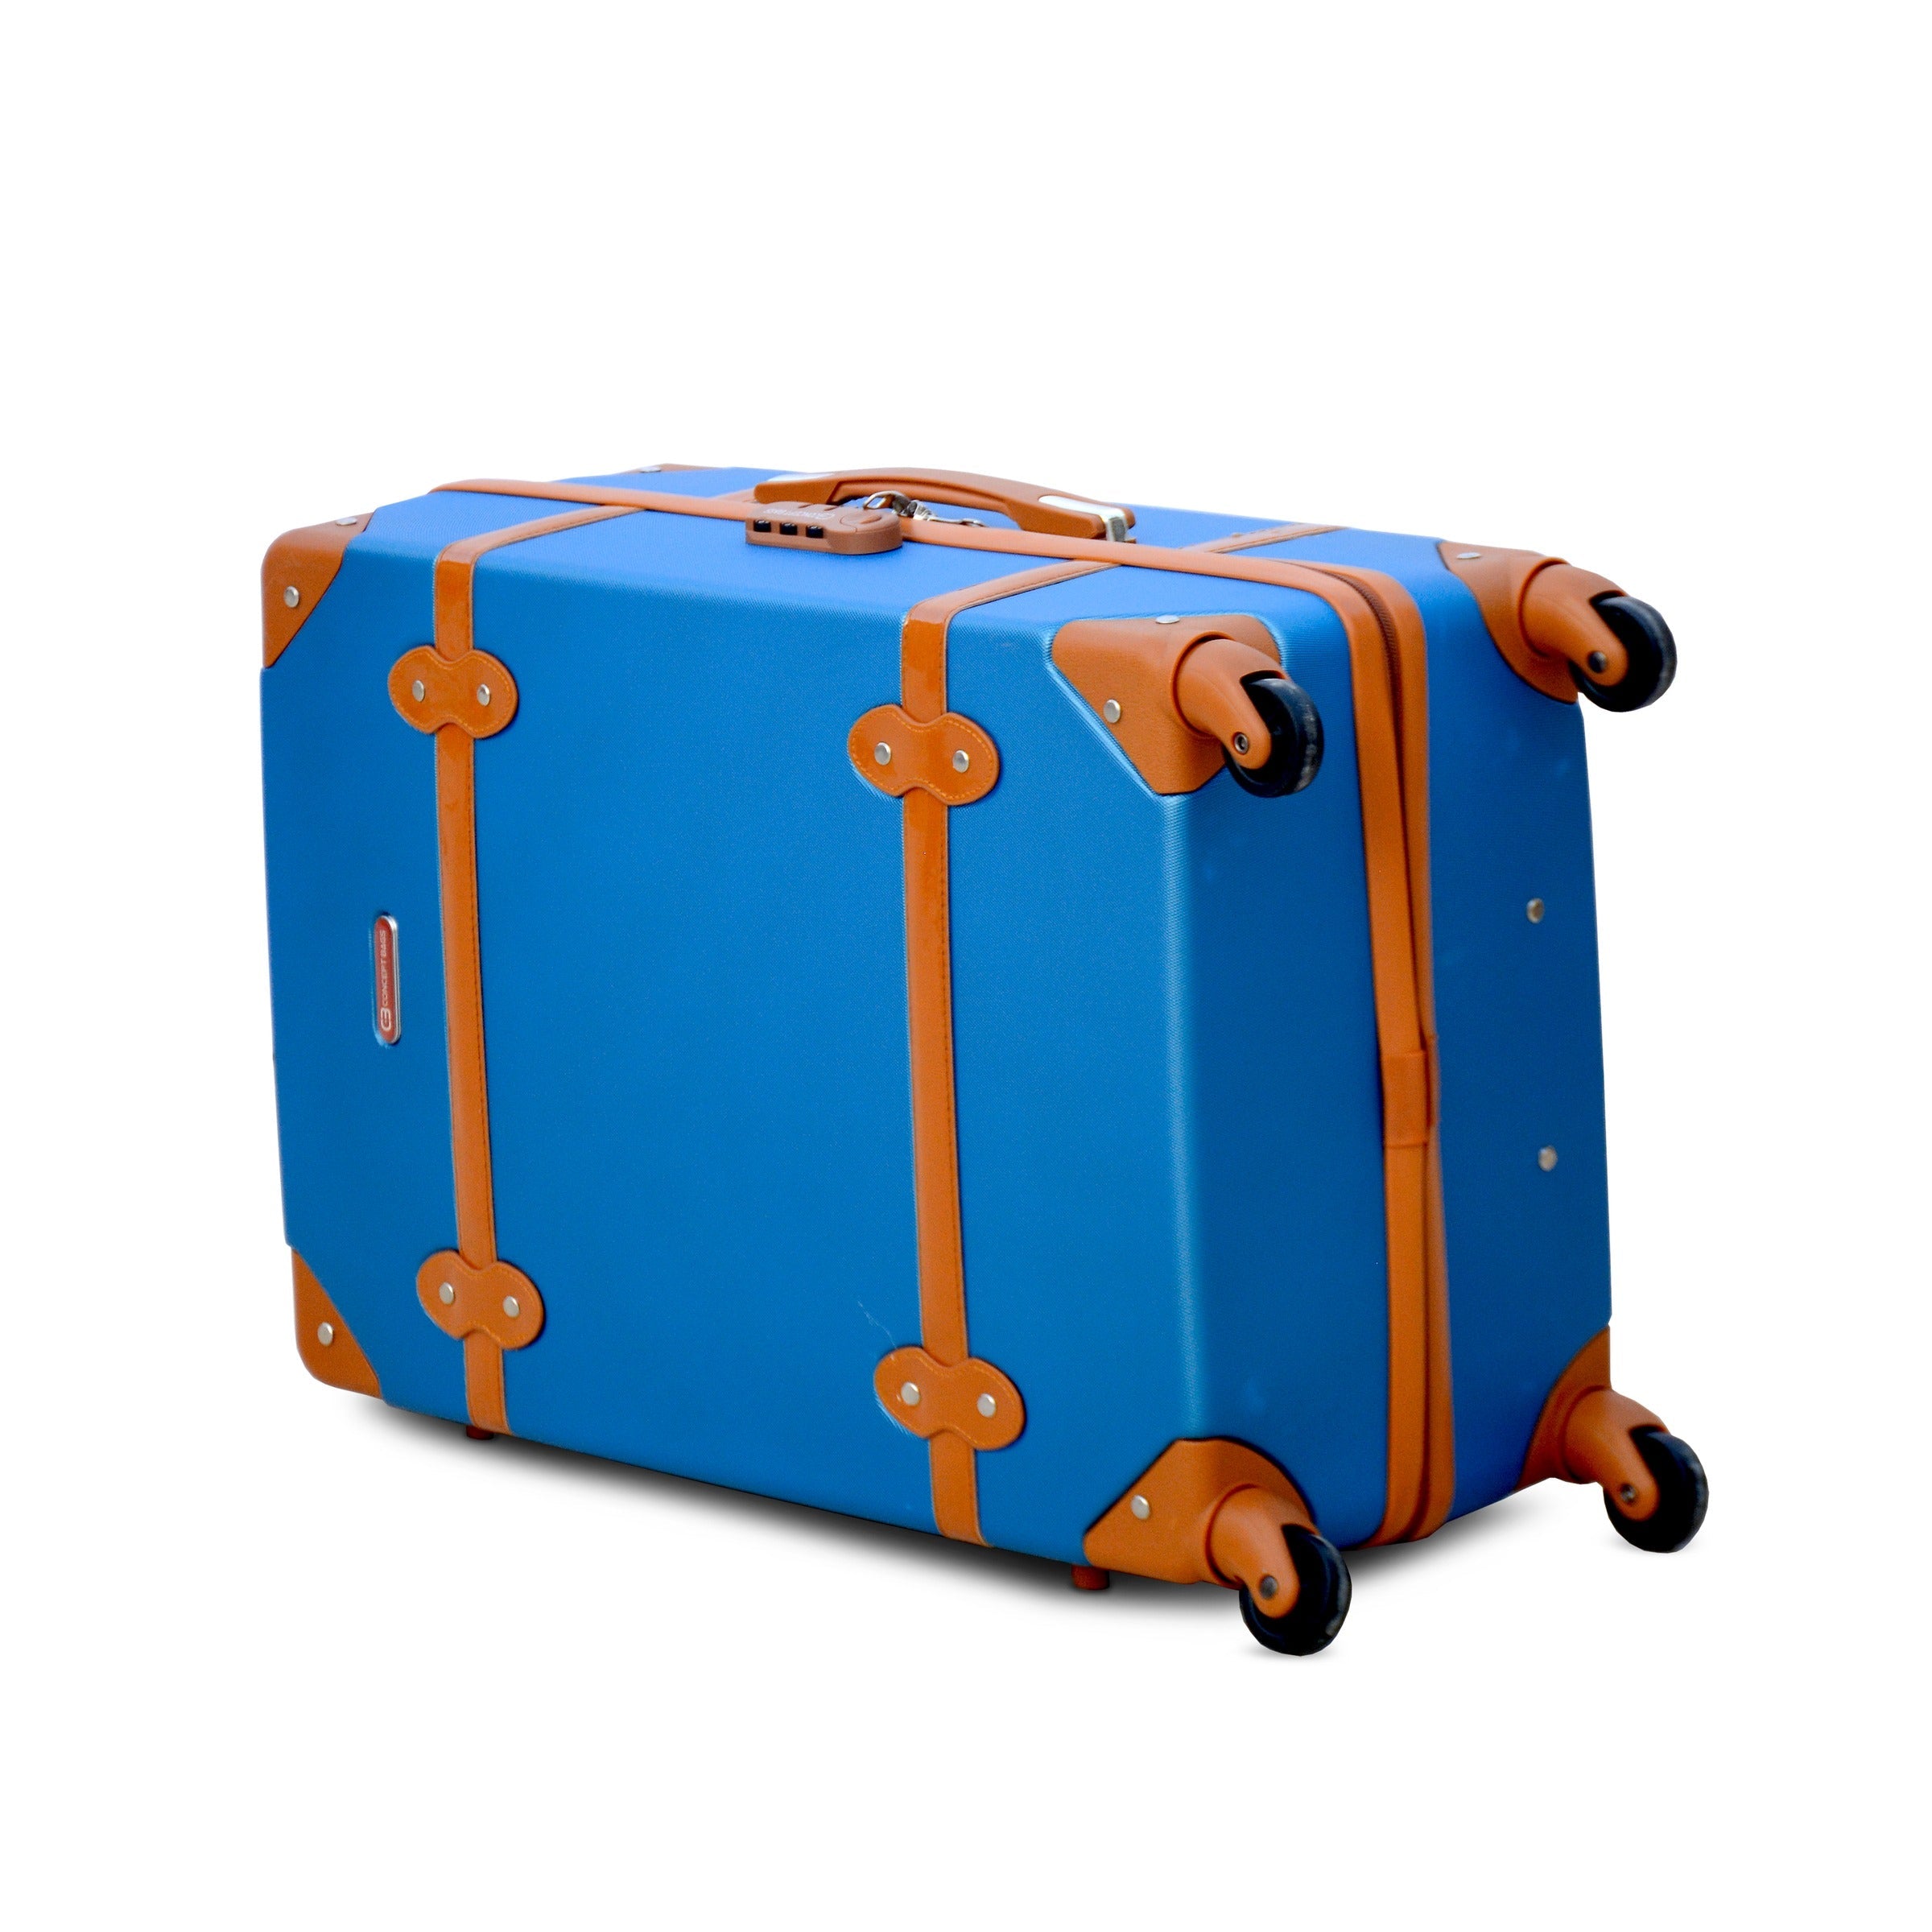 28 Inches Blue Colour Lightweight Corner Guard ABS Luggage Hard Case Trolley Bag